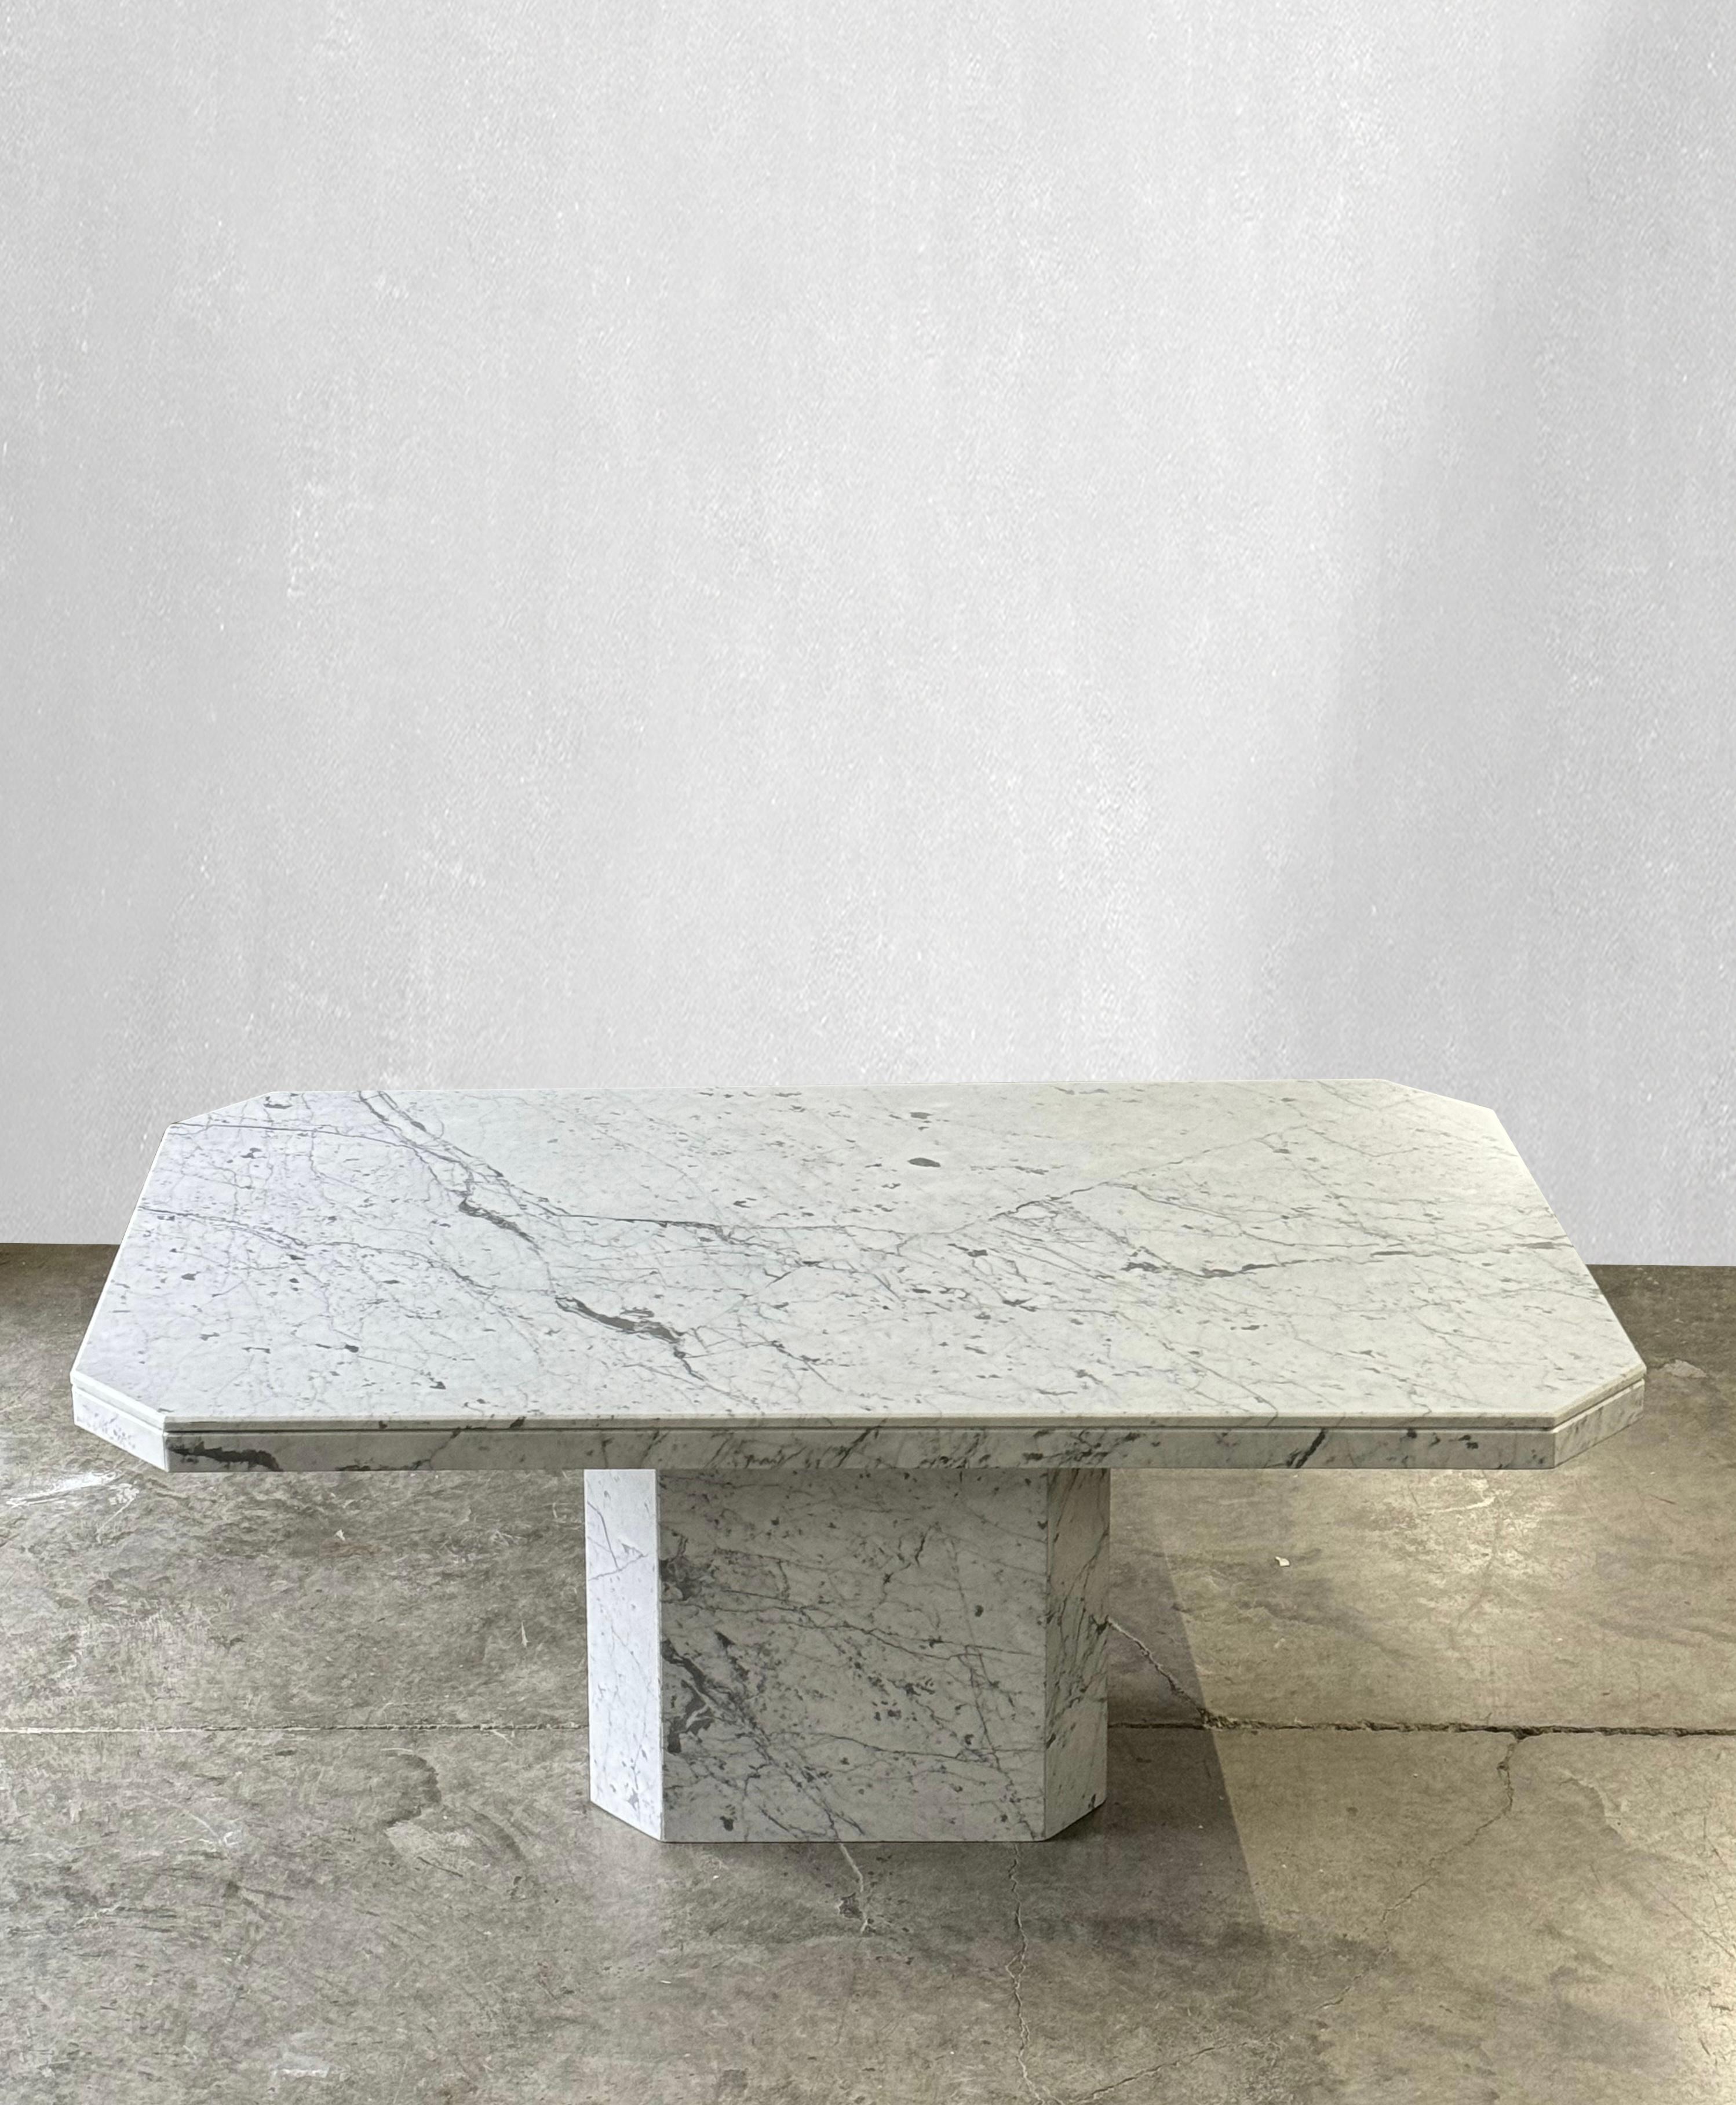 C. 1970

Monumental Carrara marble dining table with matching base.

Stunning veining throughout the solid Carrara marble top and base. This table has  unique angled corners. The matching pedestal base also has beautiful angles. Comfortably seats 6